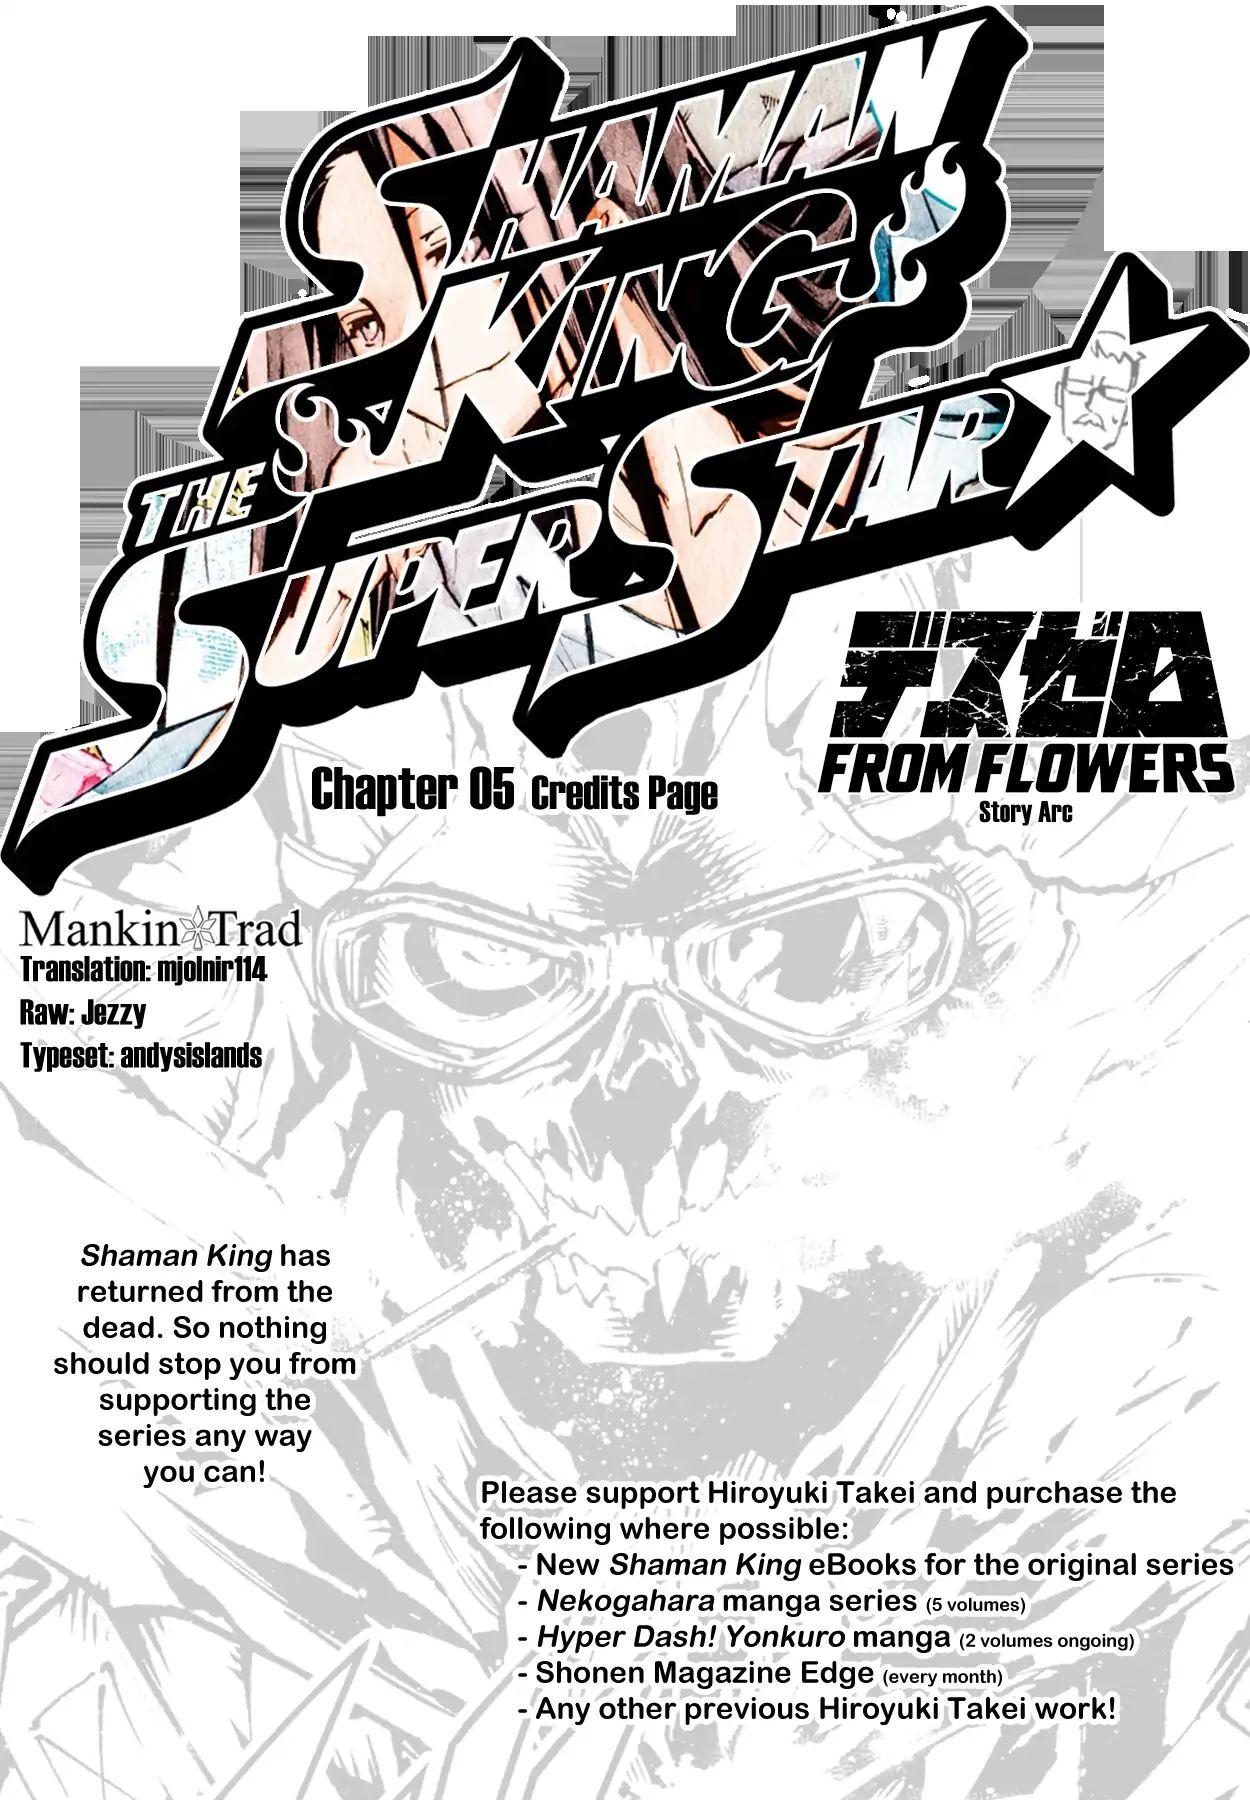 Shaman King The Super Star Chapter 5 Read Shaman King The Super Star Chapter 5 Online At Allmanga Us Page 1